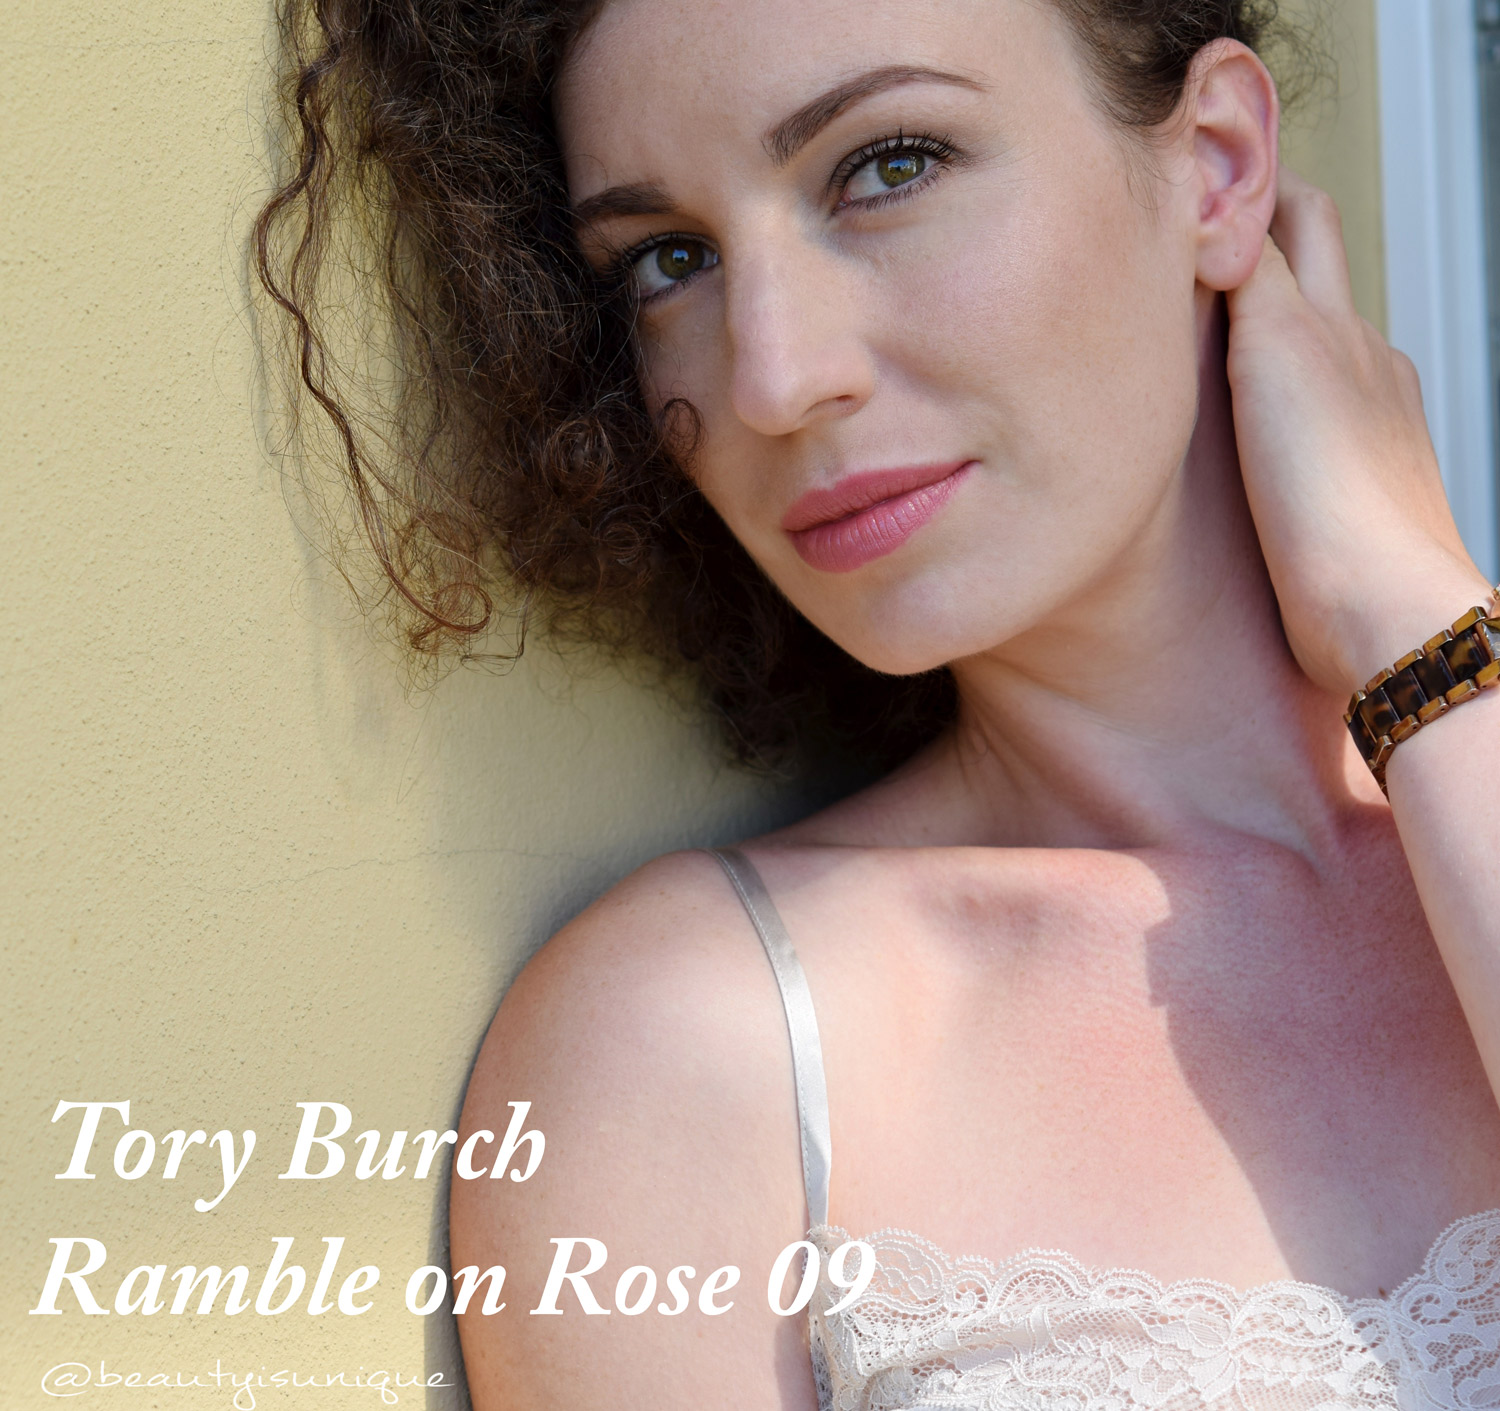 tory-burch-ramble-on-rose-swatches